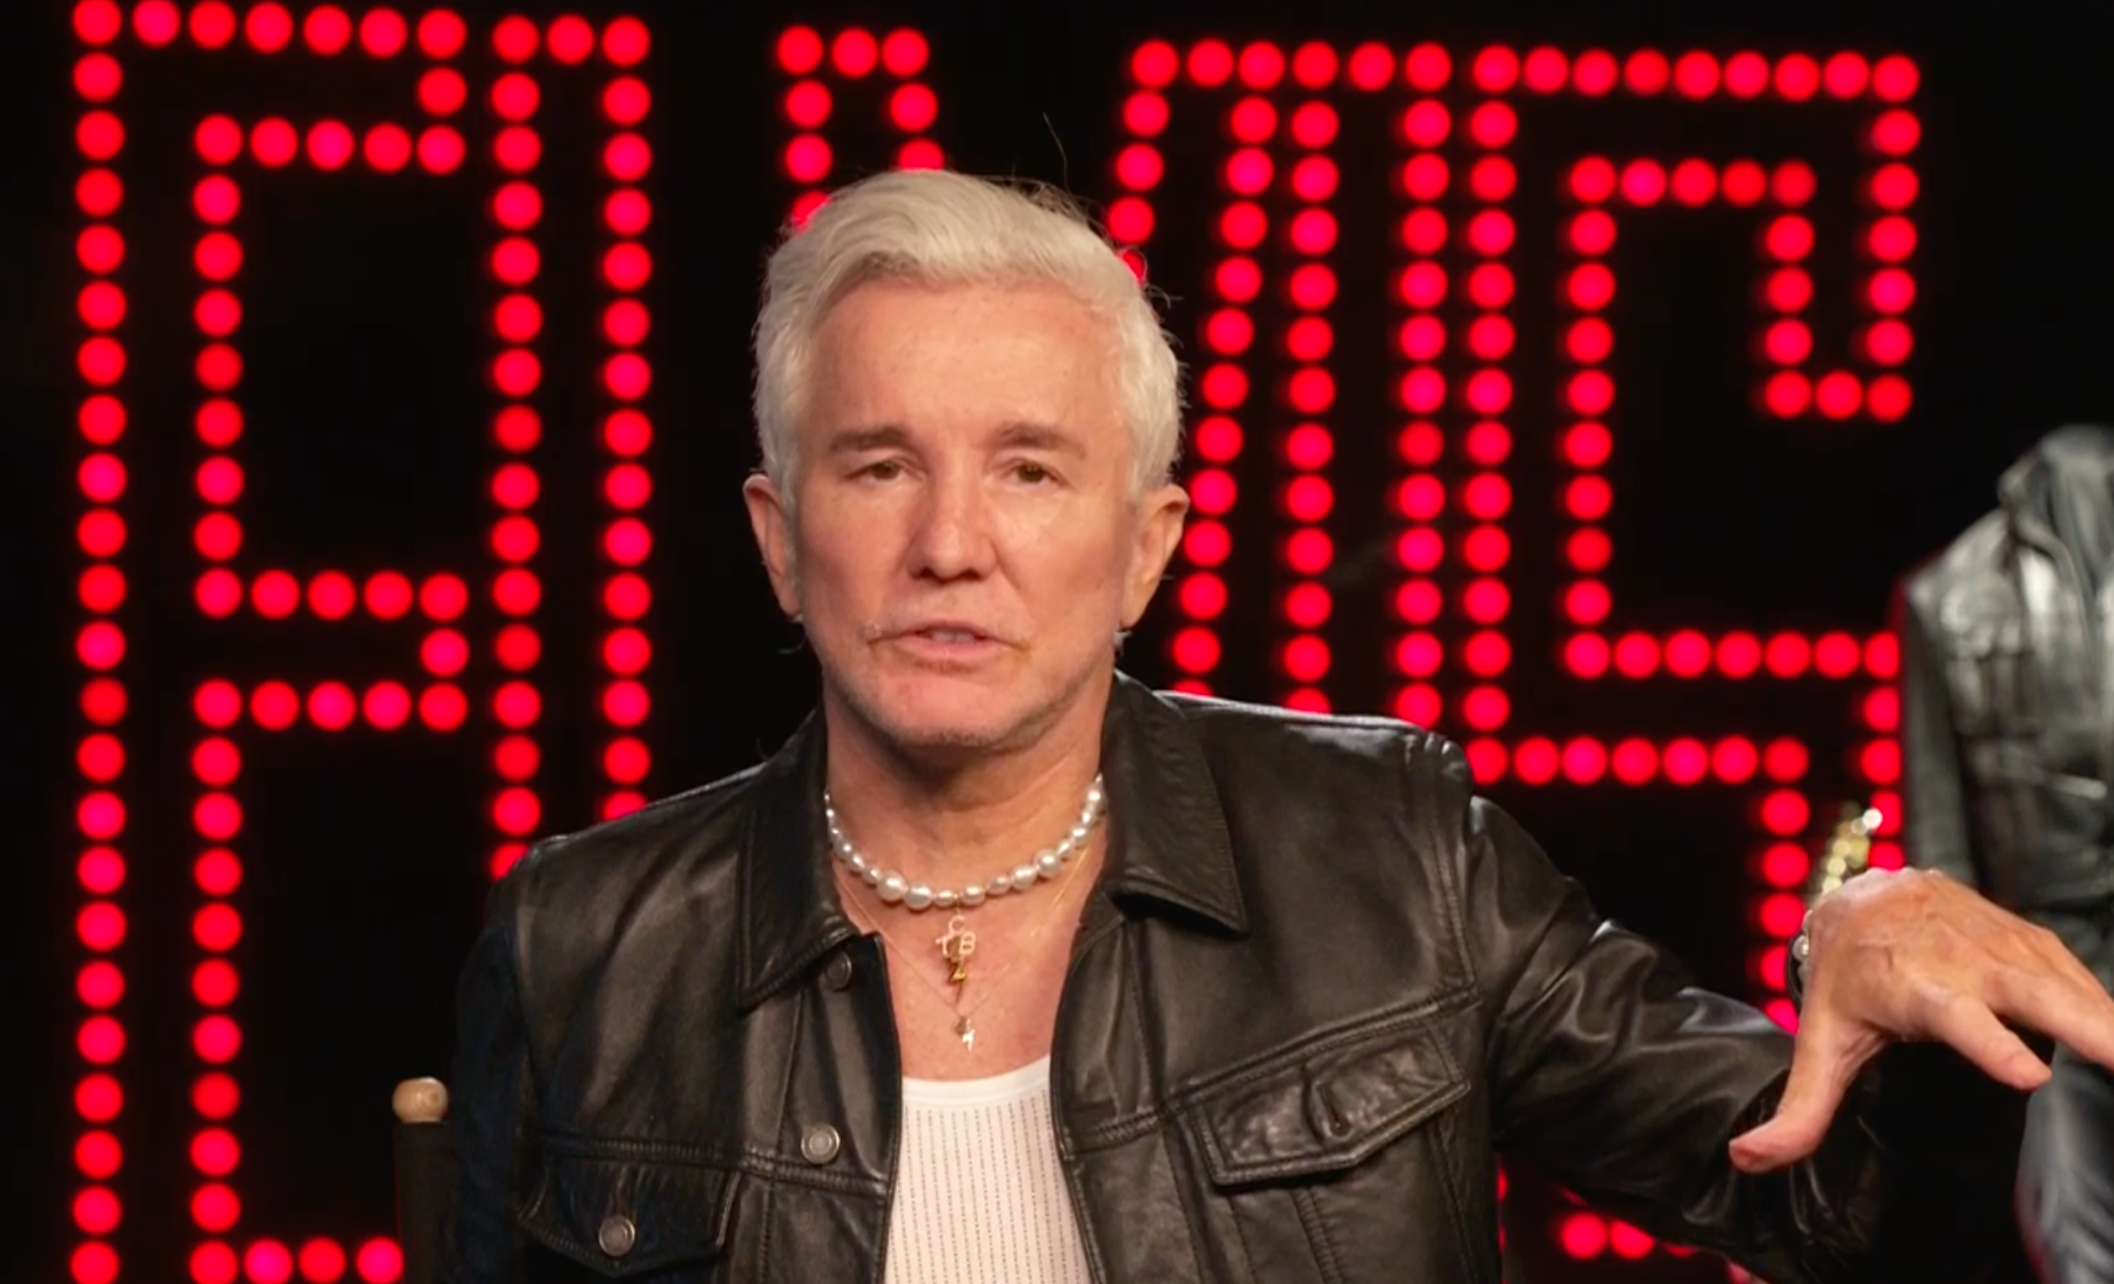 Baz Luhrmann and the cast of Elvis on the late singer’s legacy